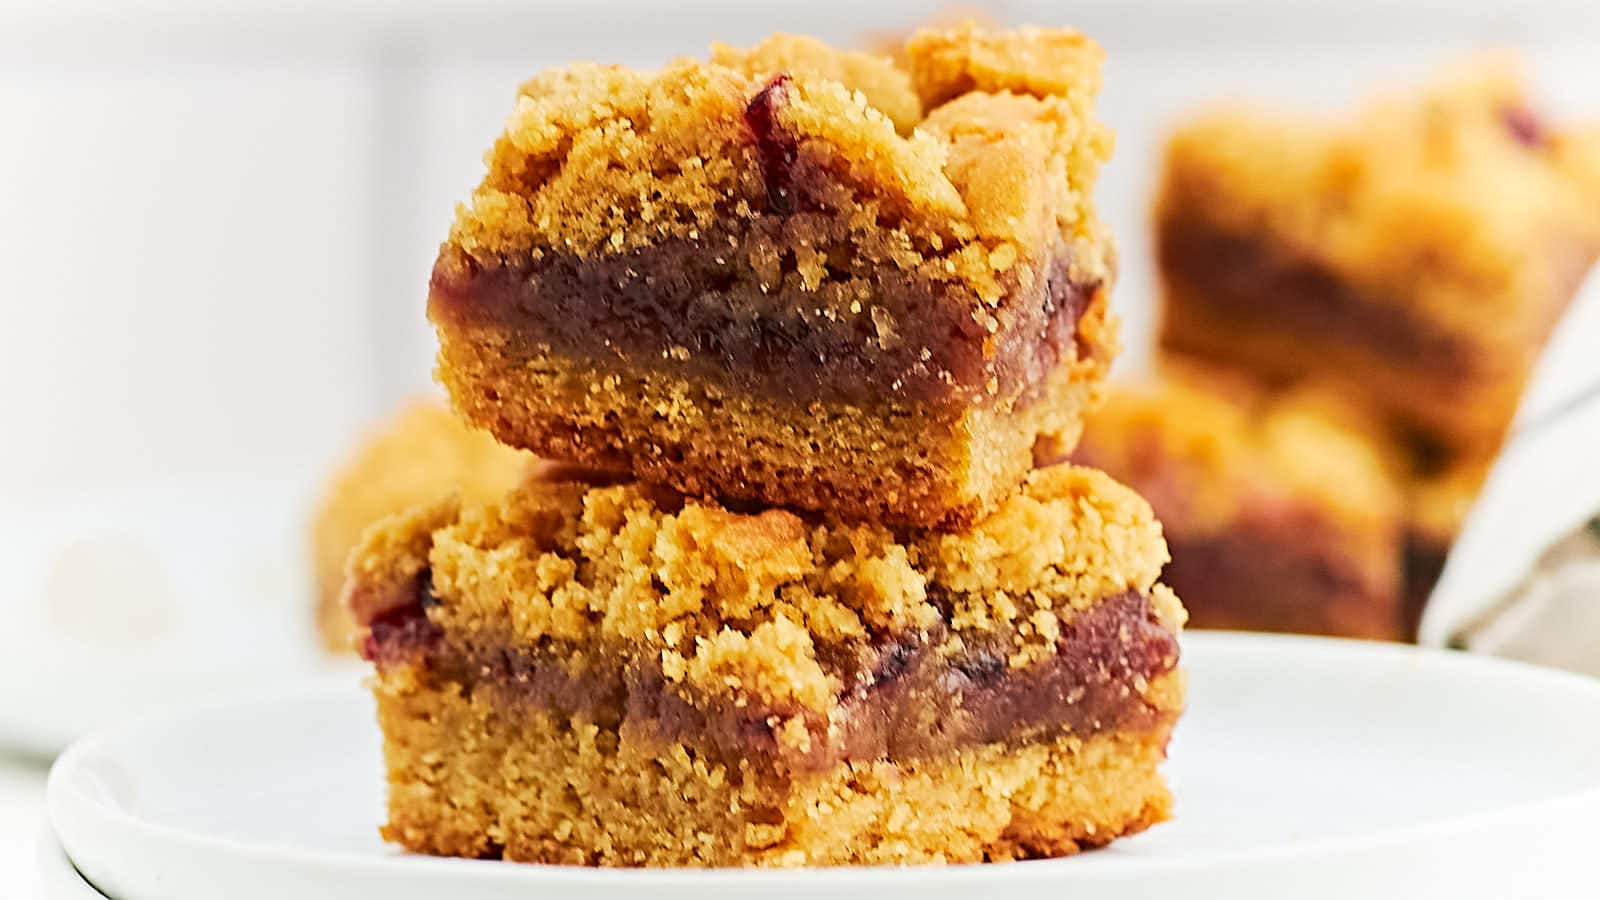 Peanut Butter and Jelly Dessert Bars by Cheerful Cook.